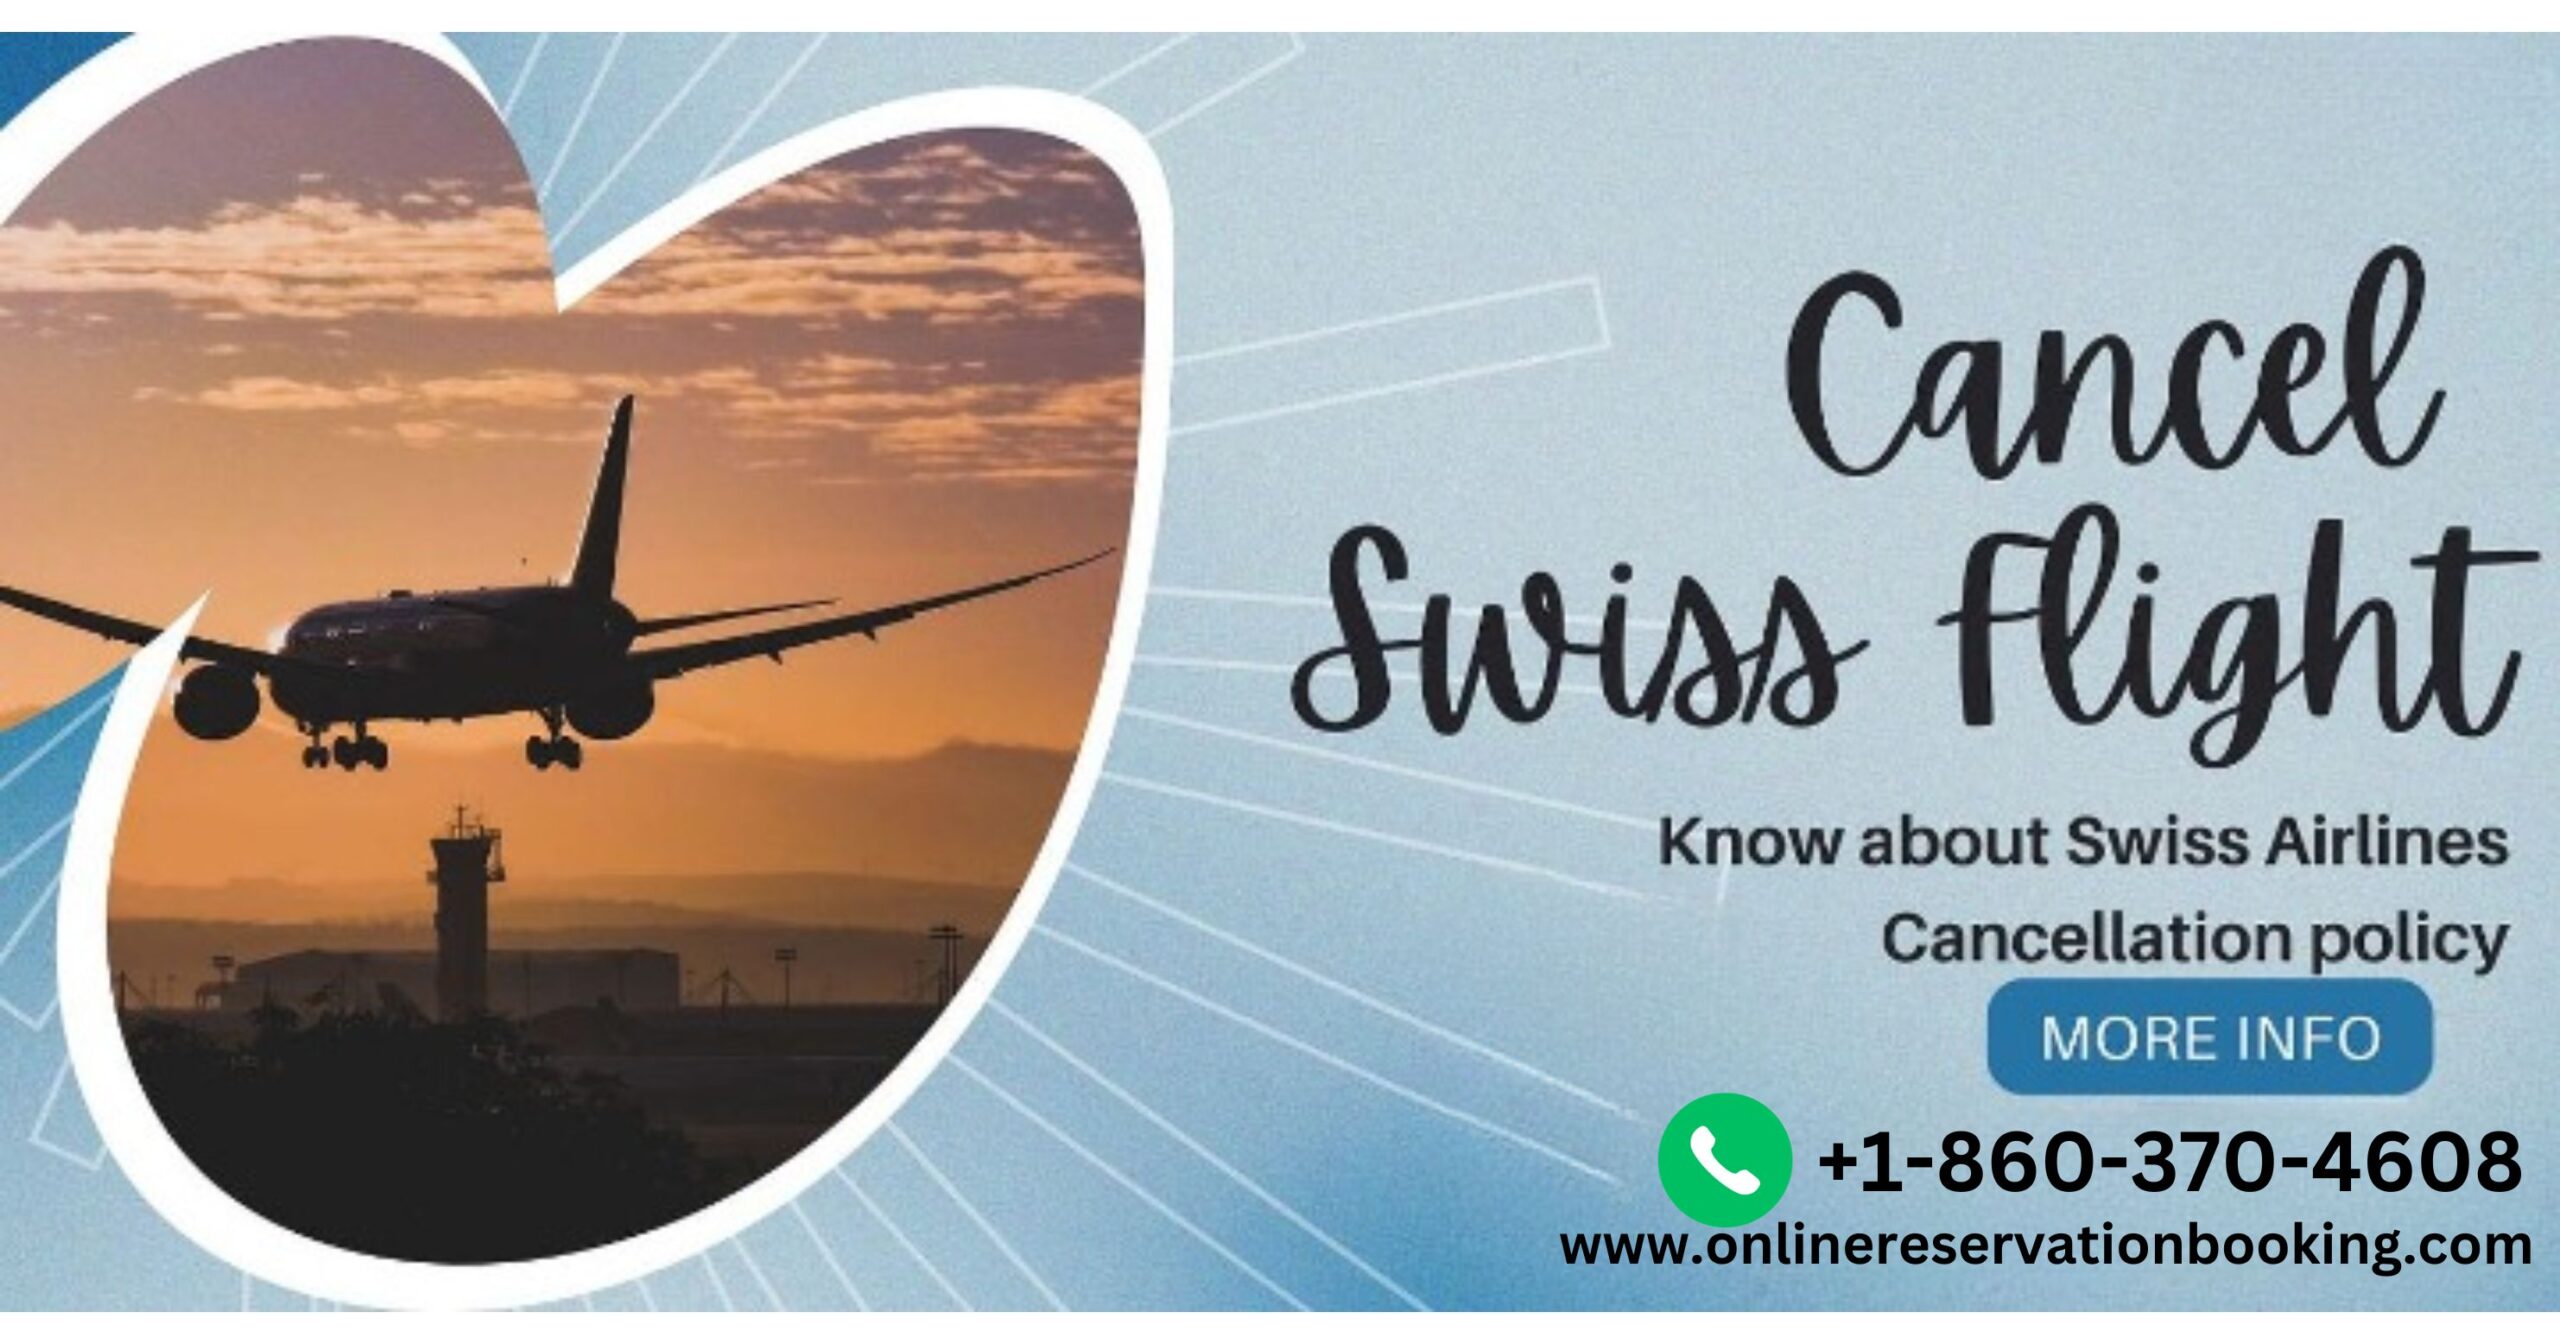 SWISS Air Cancellation Policy